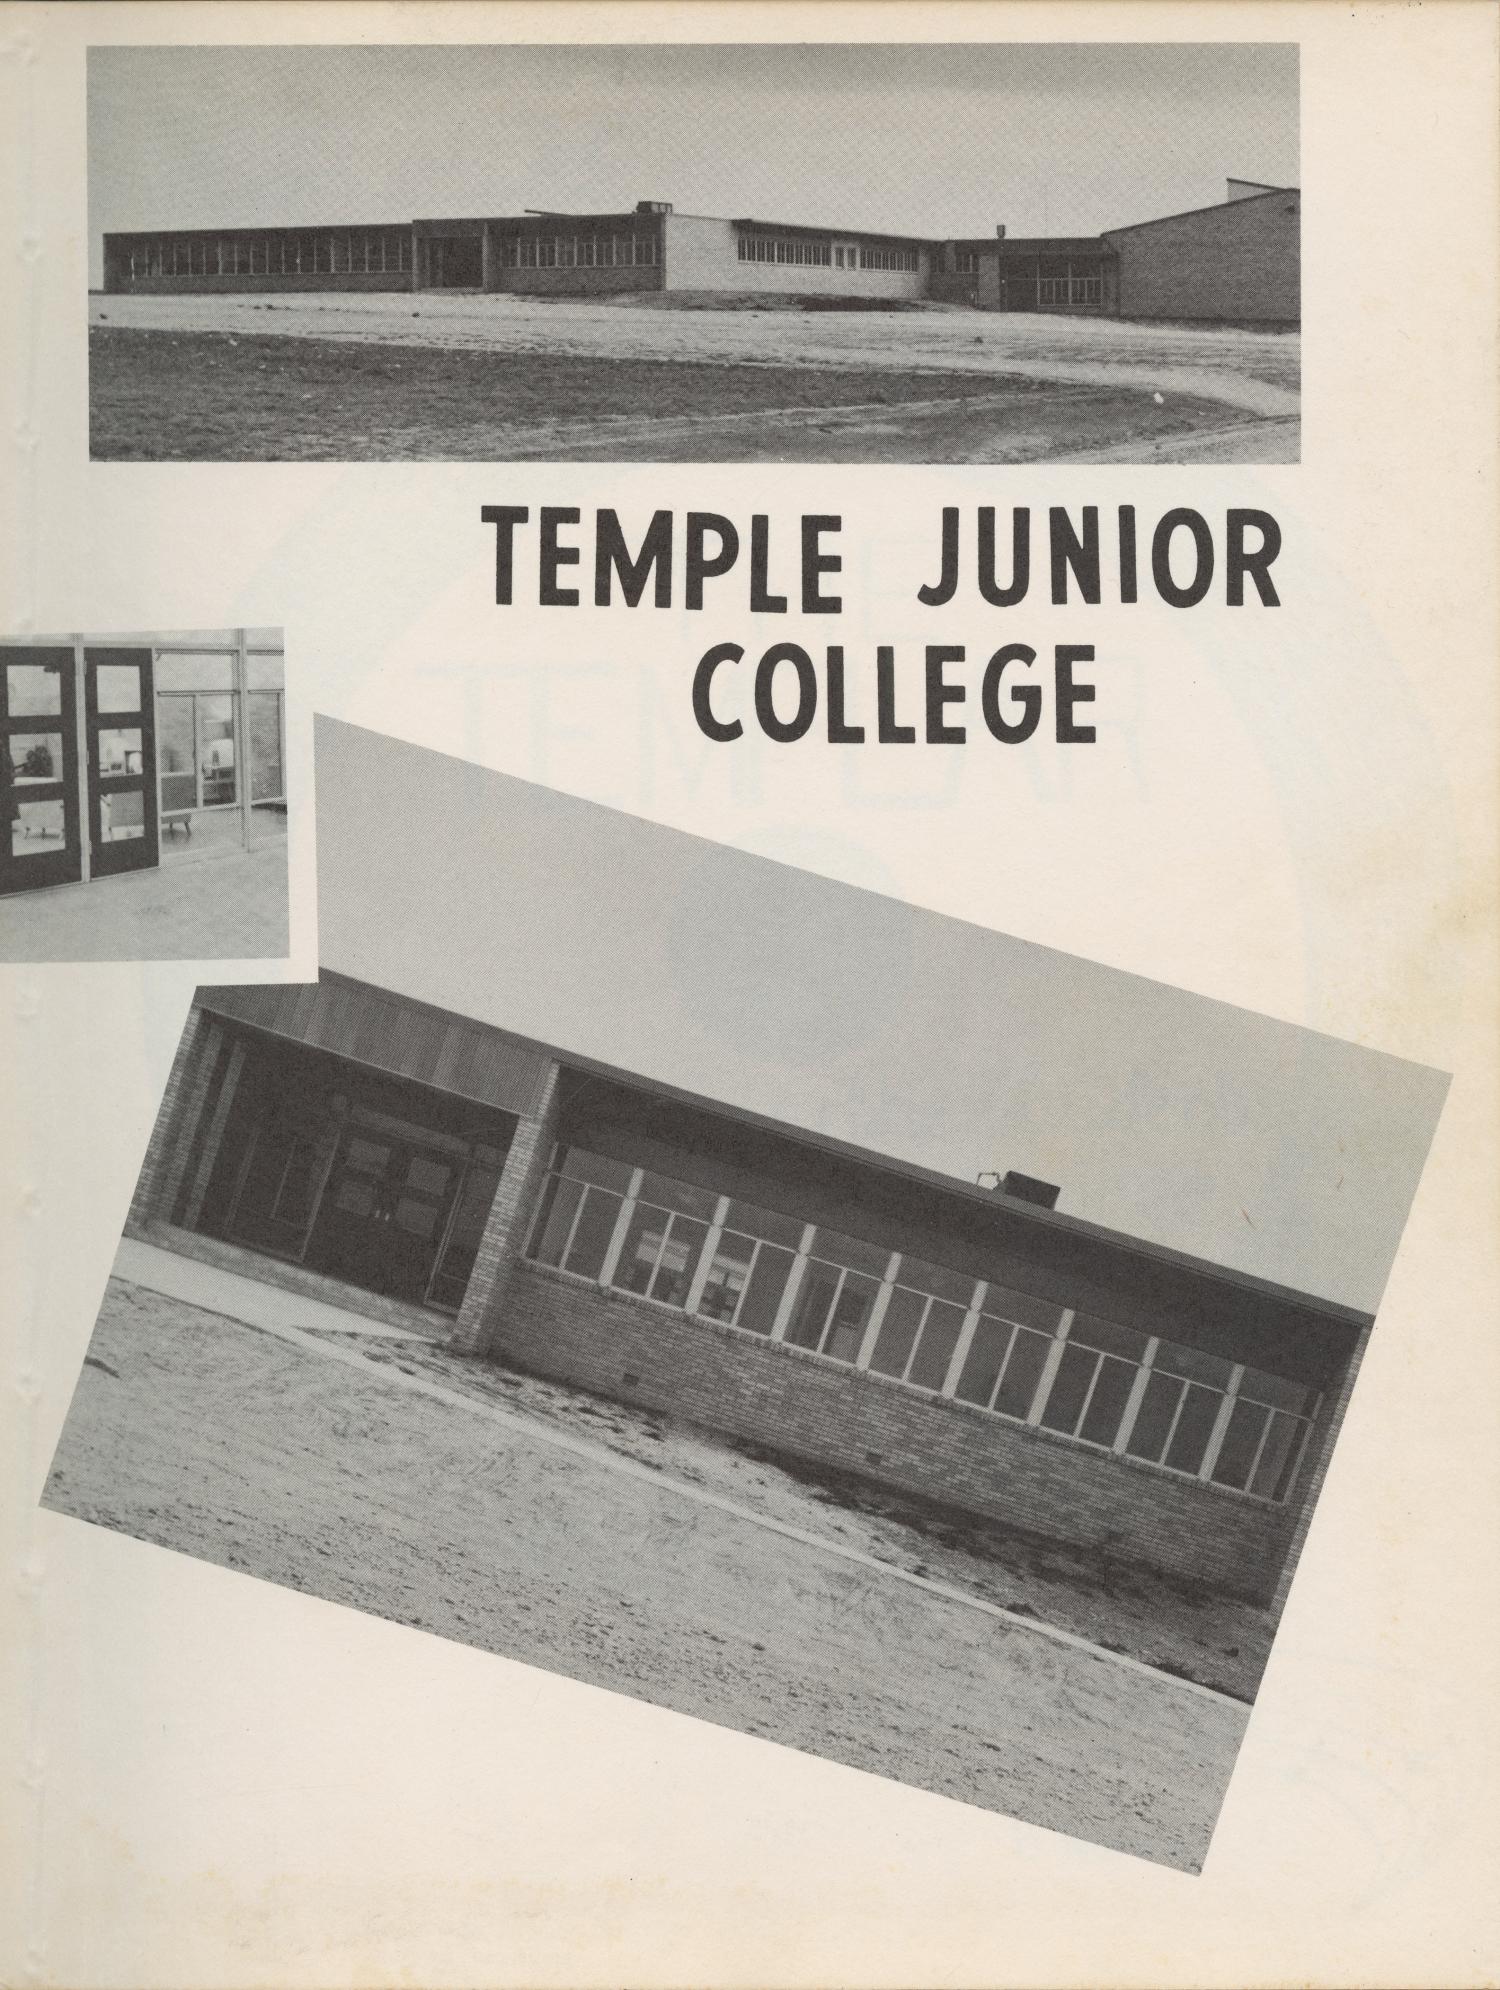 The Templar, Yearbook of Temple Junior College, 1957
                                                
                                                    [Sequence #]: 3 of 140
                                                